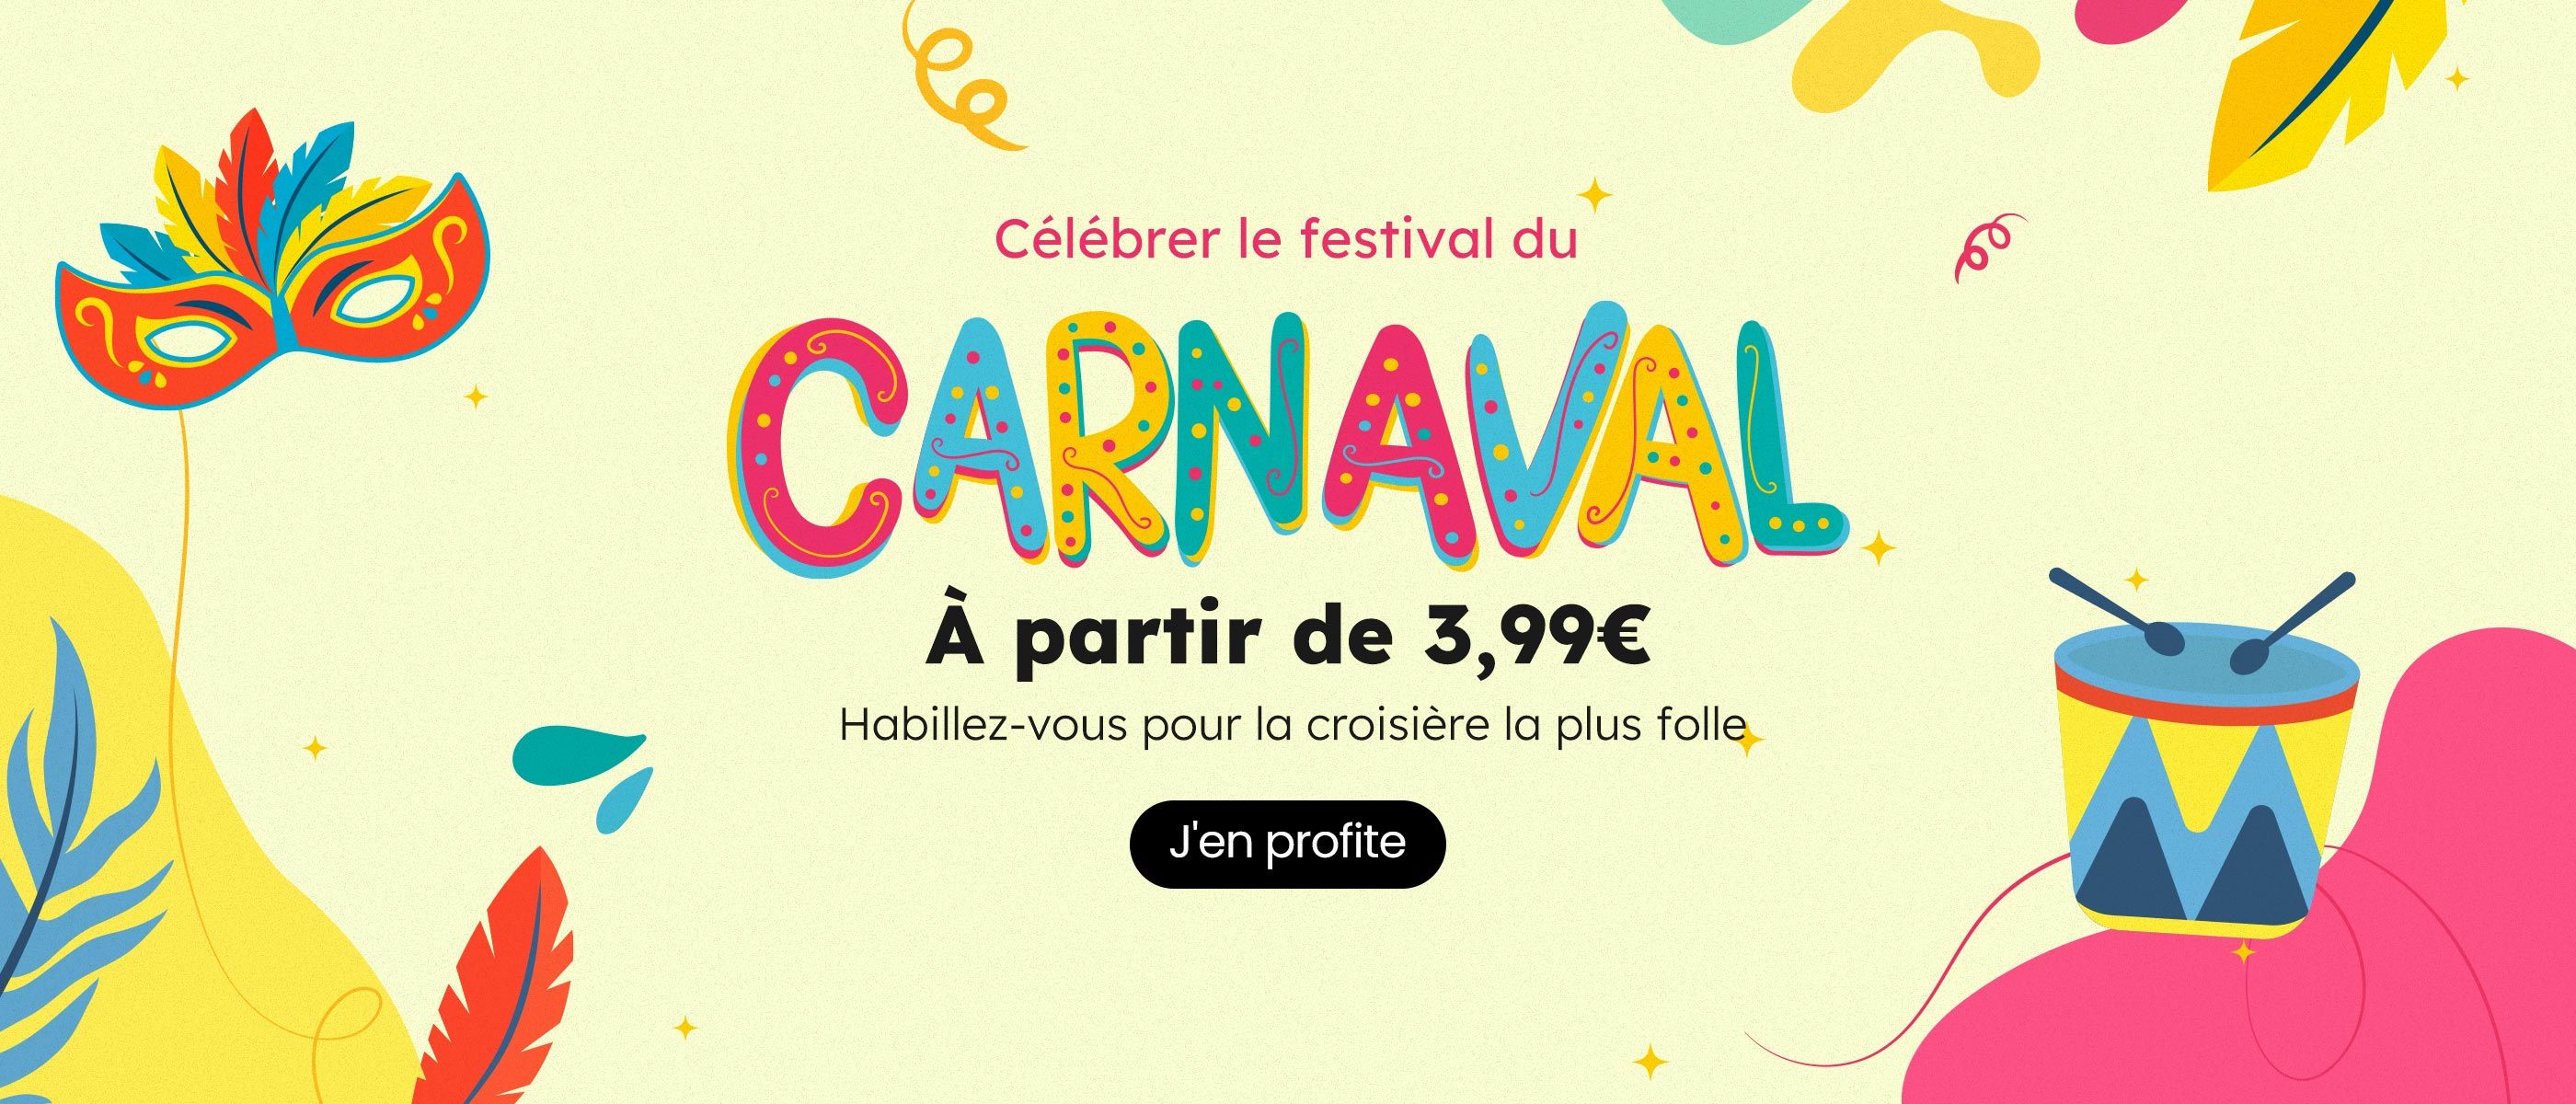 Click it to join Offre Carnaval activity